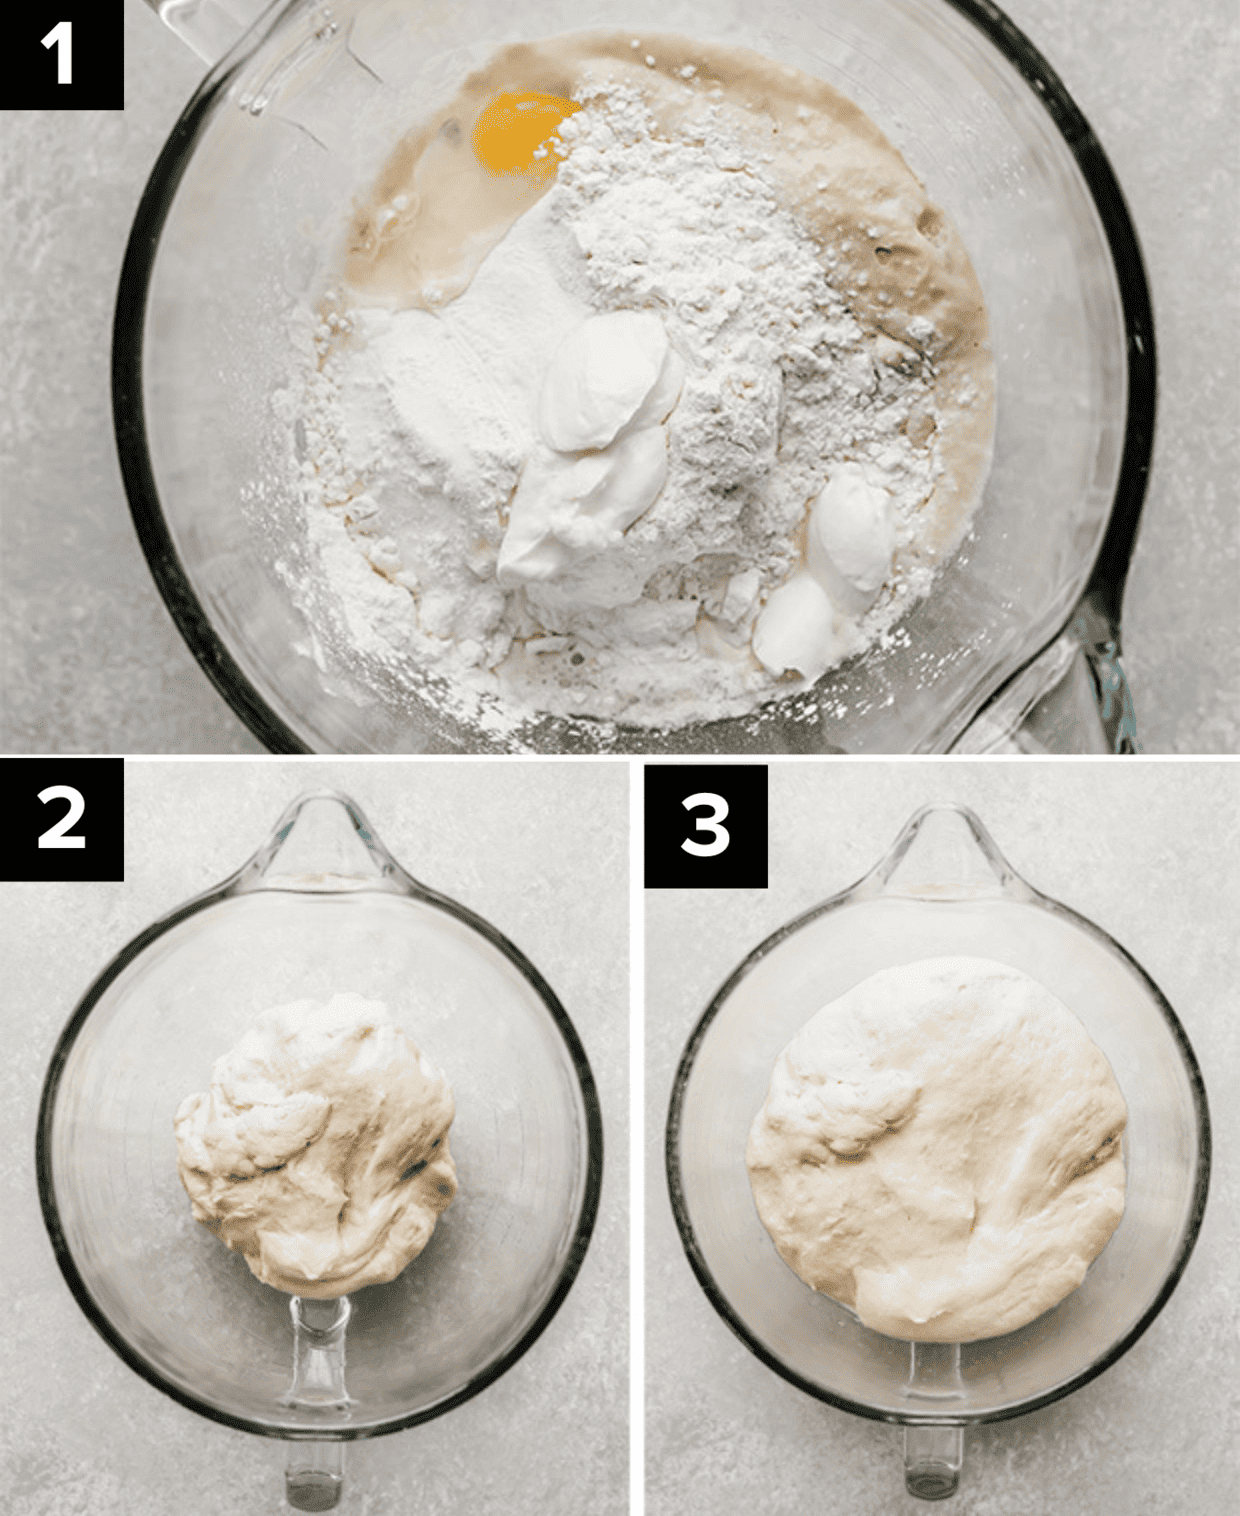 Three images showing how to make yogurt naan dough in a glass mixing bowl on a light gray background.